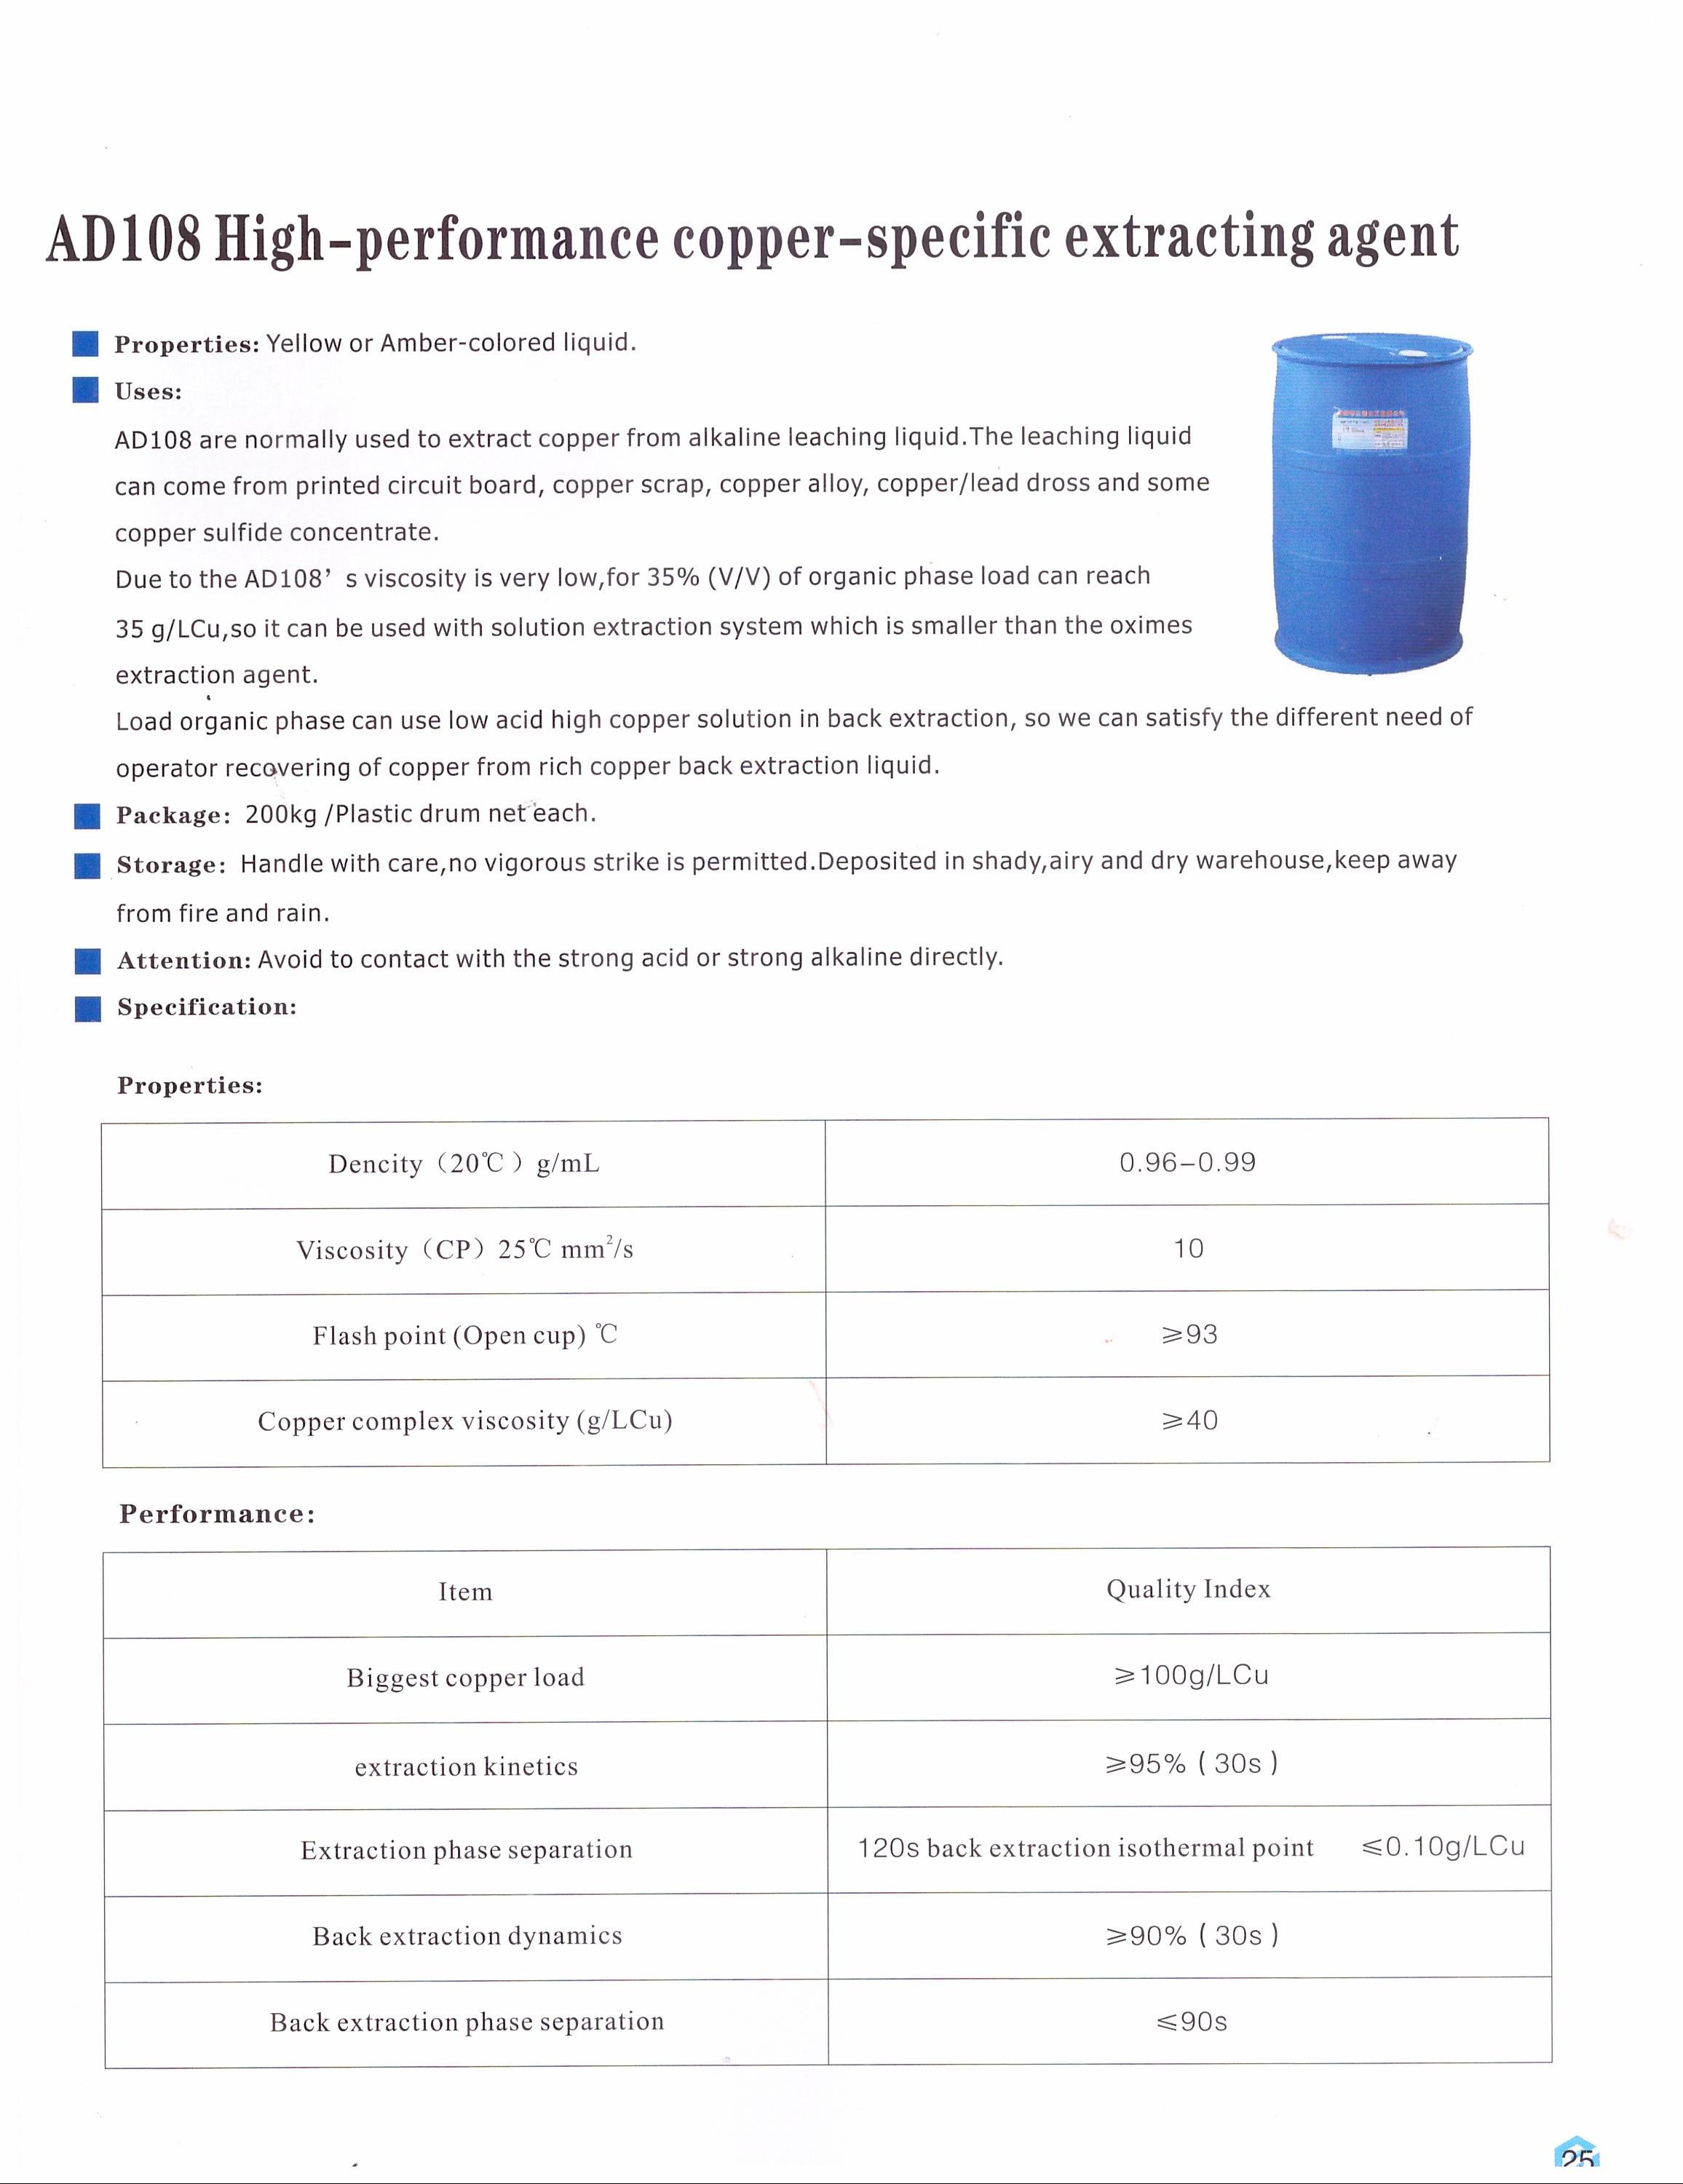 AD108 High-performance copper-specific extracting agent.jpg